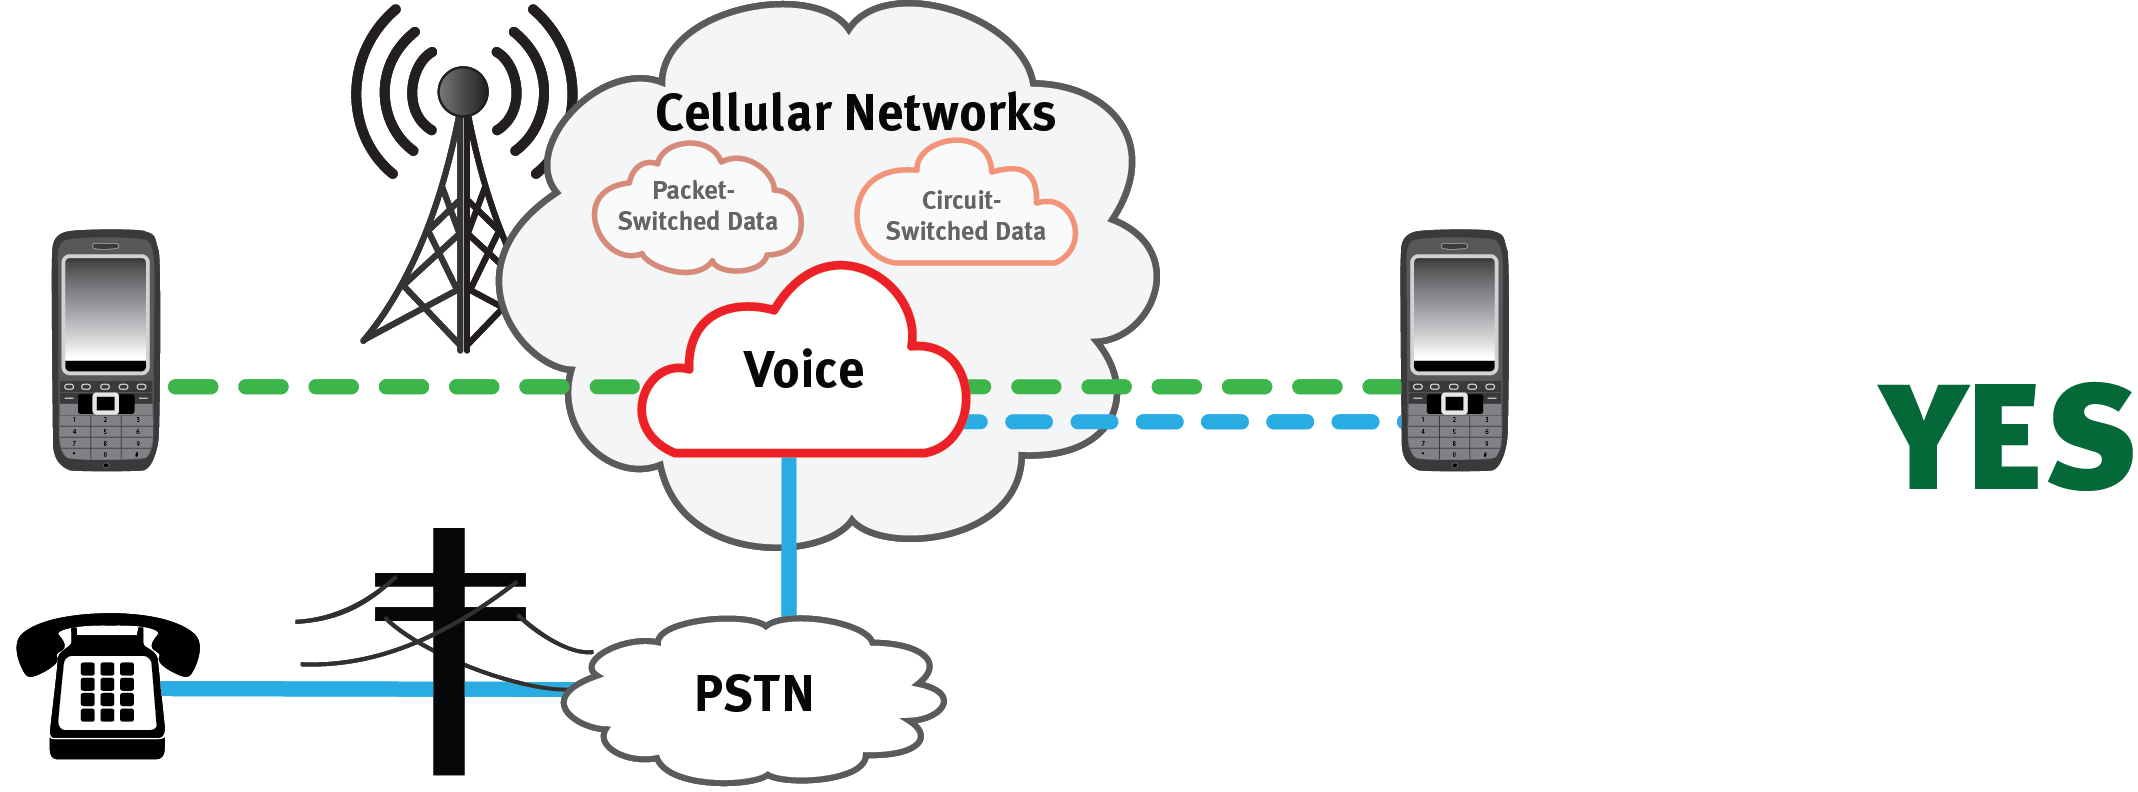 PSTN Voice Data Network between land lines and cell phones